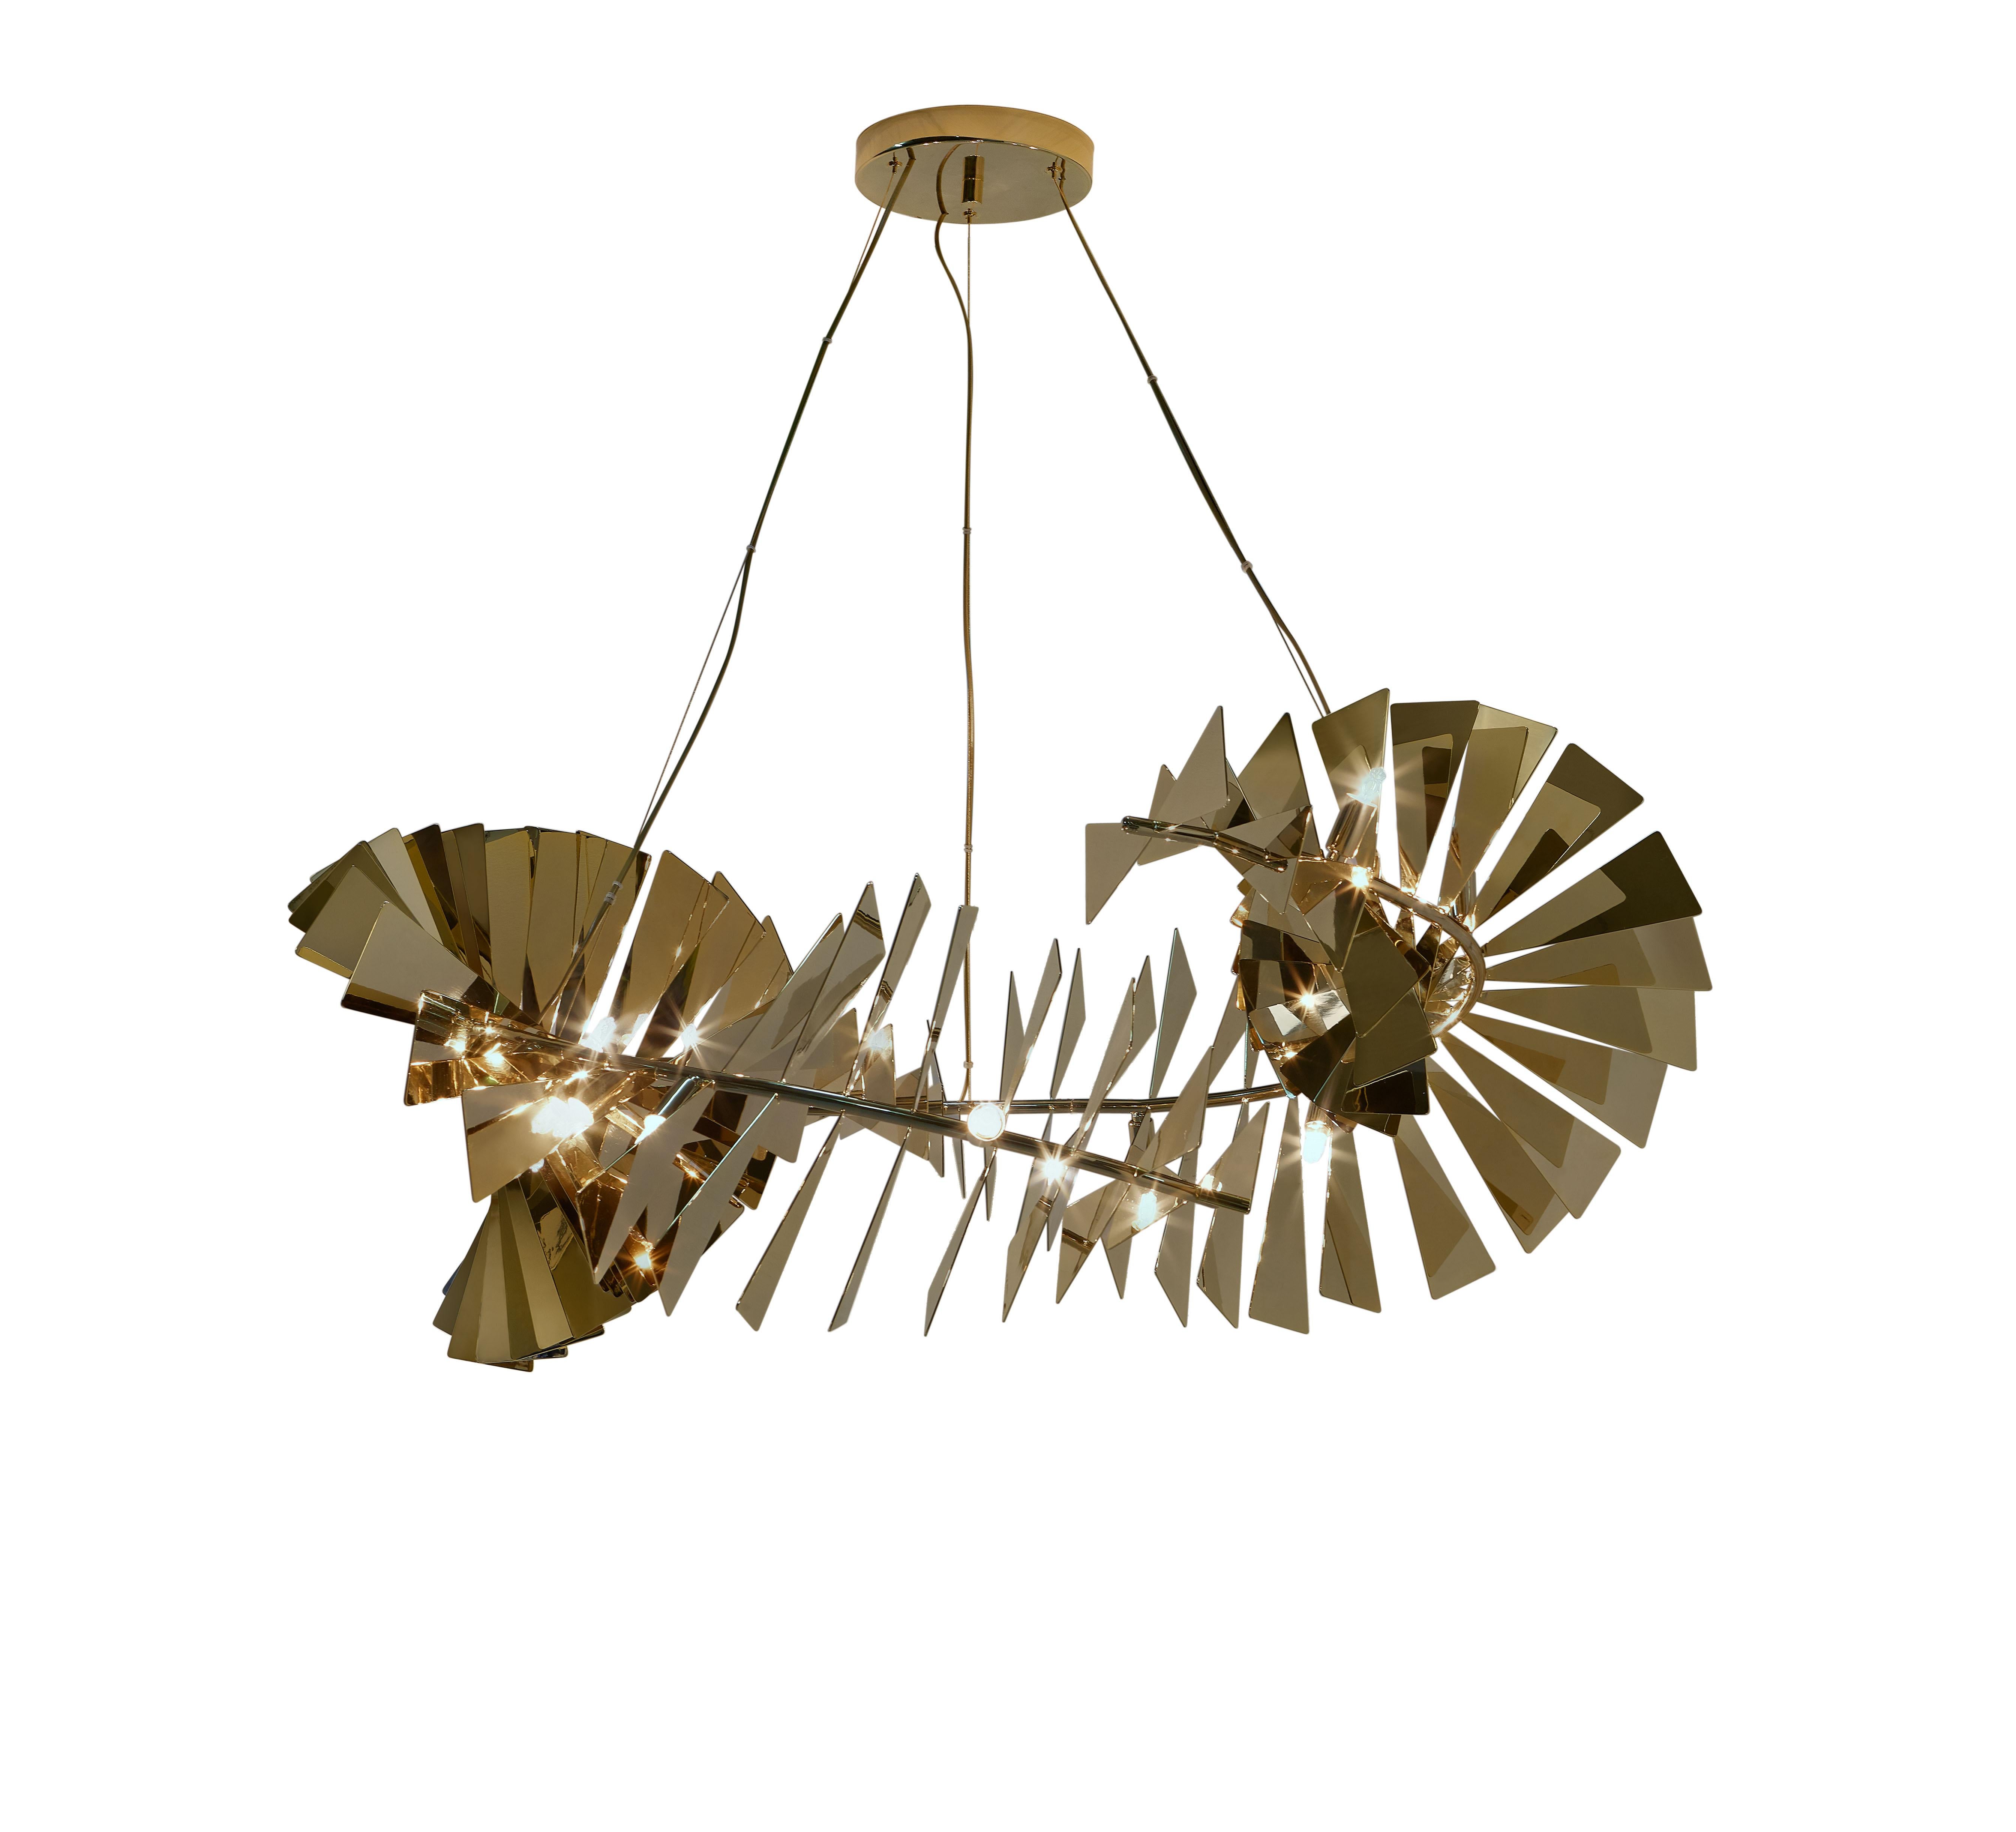 Revolution Suspension Lamp by Memoir Essence
Dimensions: D 110 x W 110 x H 66,5 cm.
Materials: Polished brass gold plated.

Revolution is a suspension lamp, a true revolution of brass curved slices, combined in a vortex shape, capable of bringing to